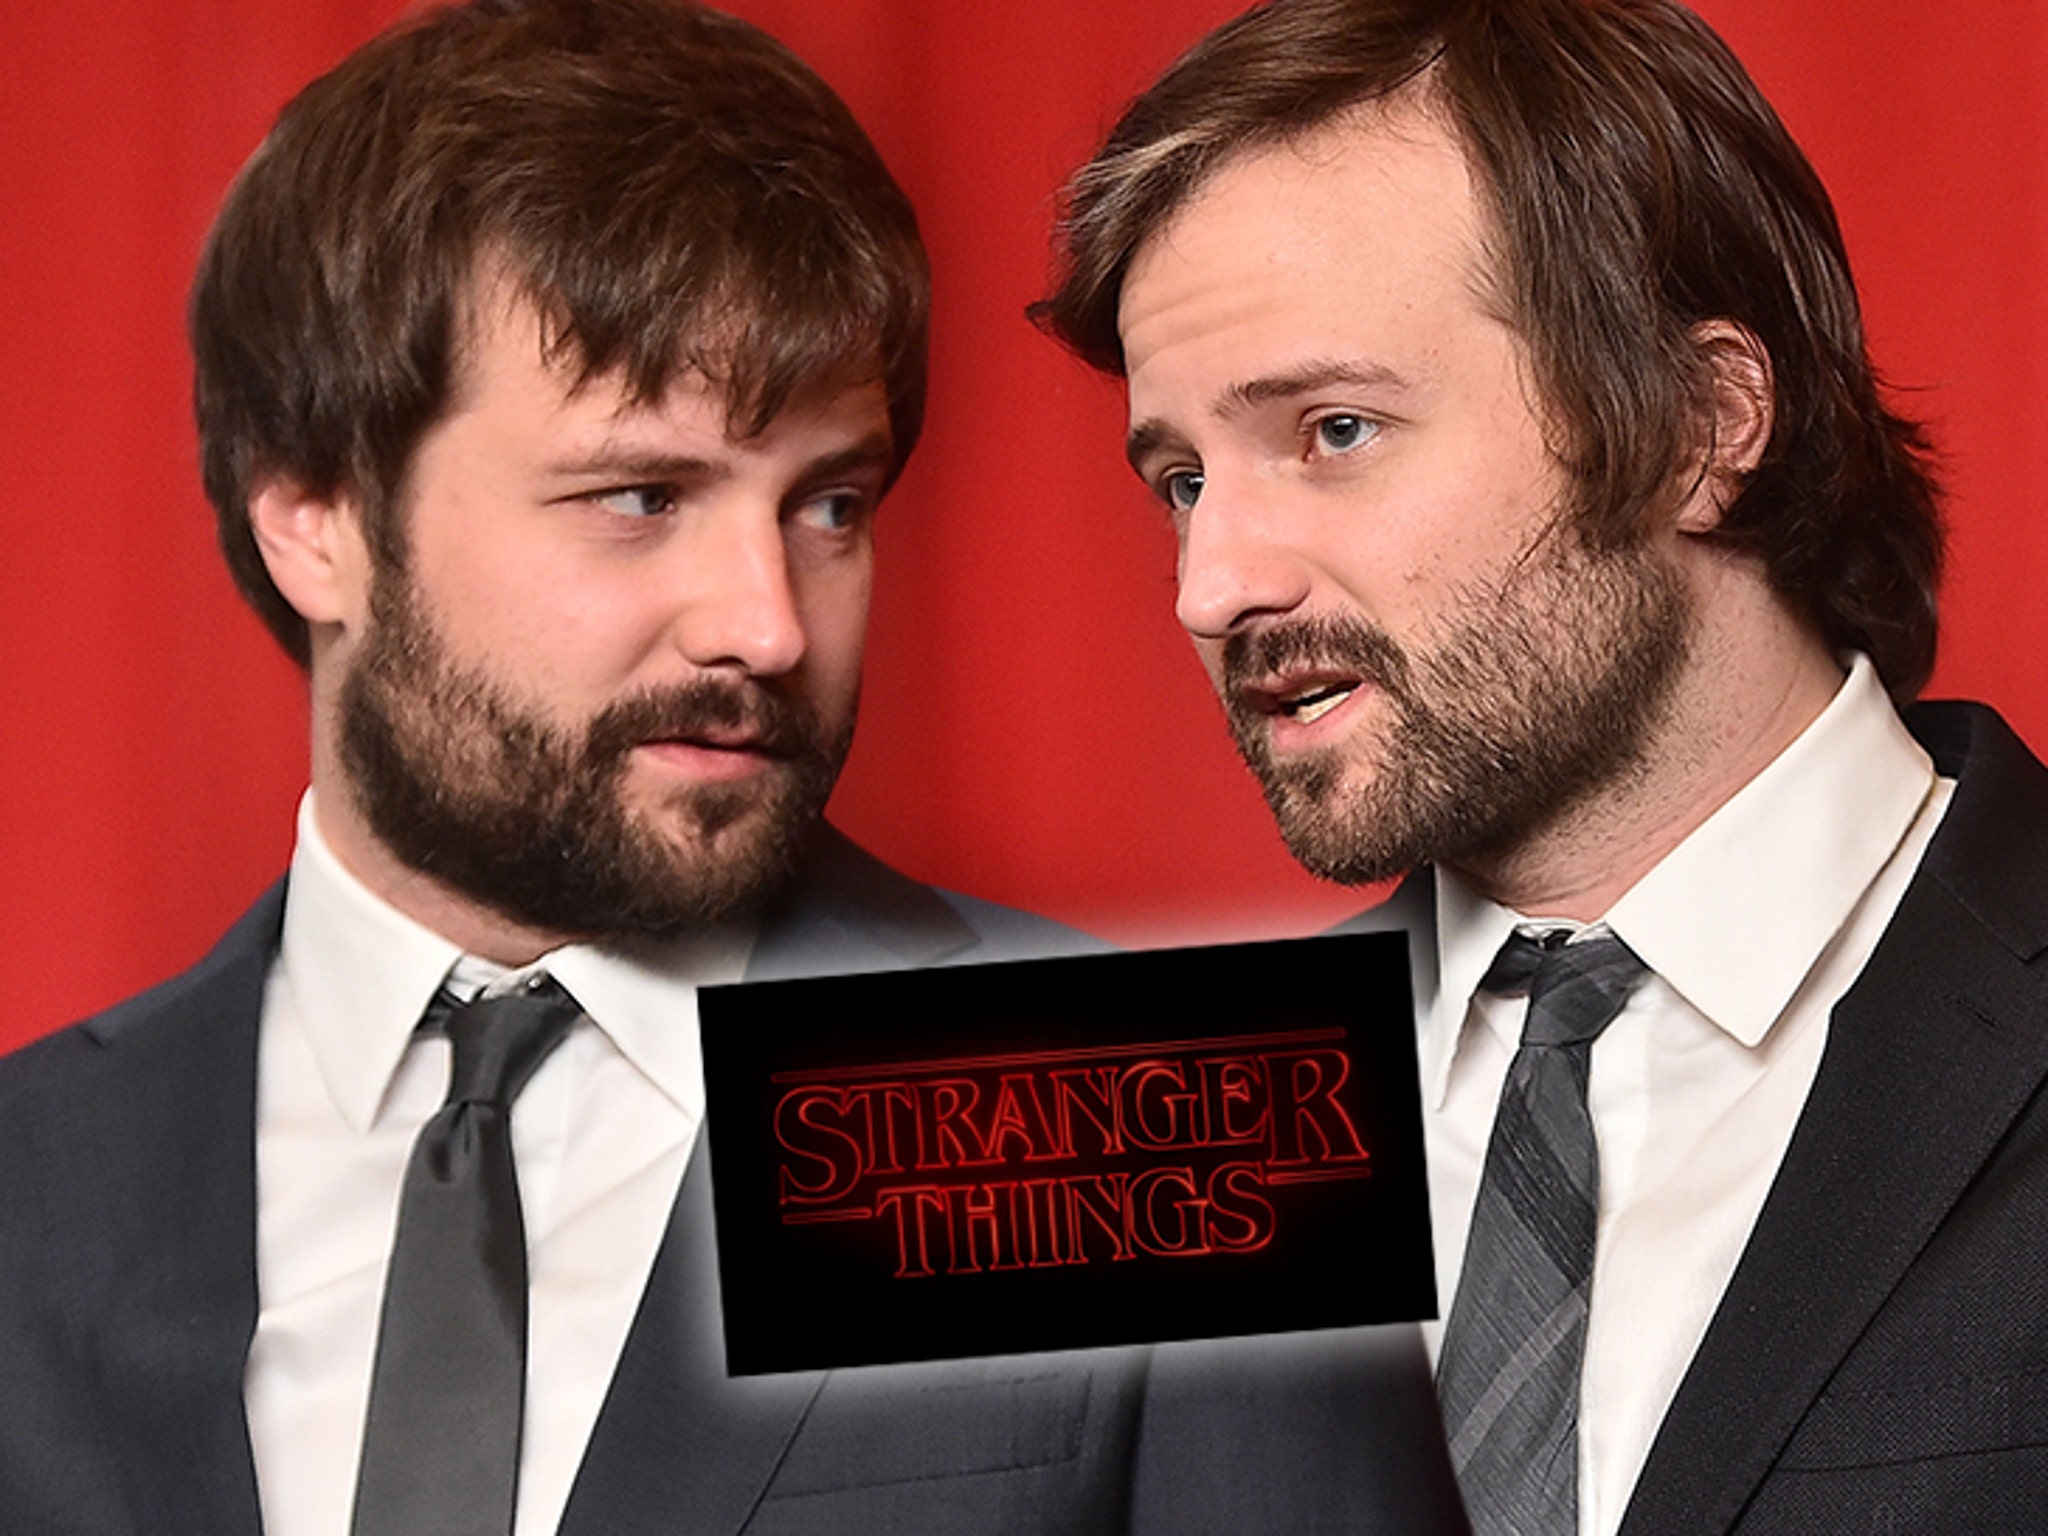 Stranger Things' Duffer Brothers Have Proof They Didn't Steal Show Idea